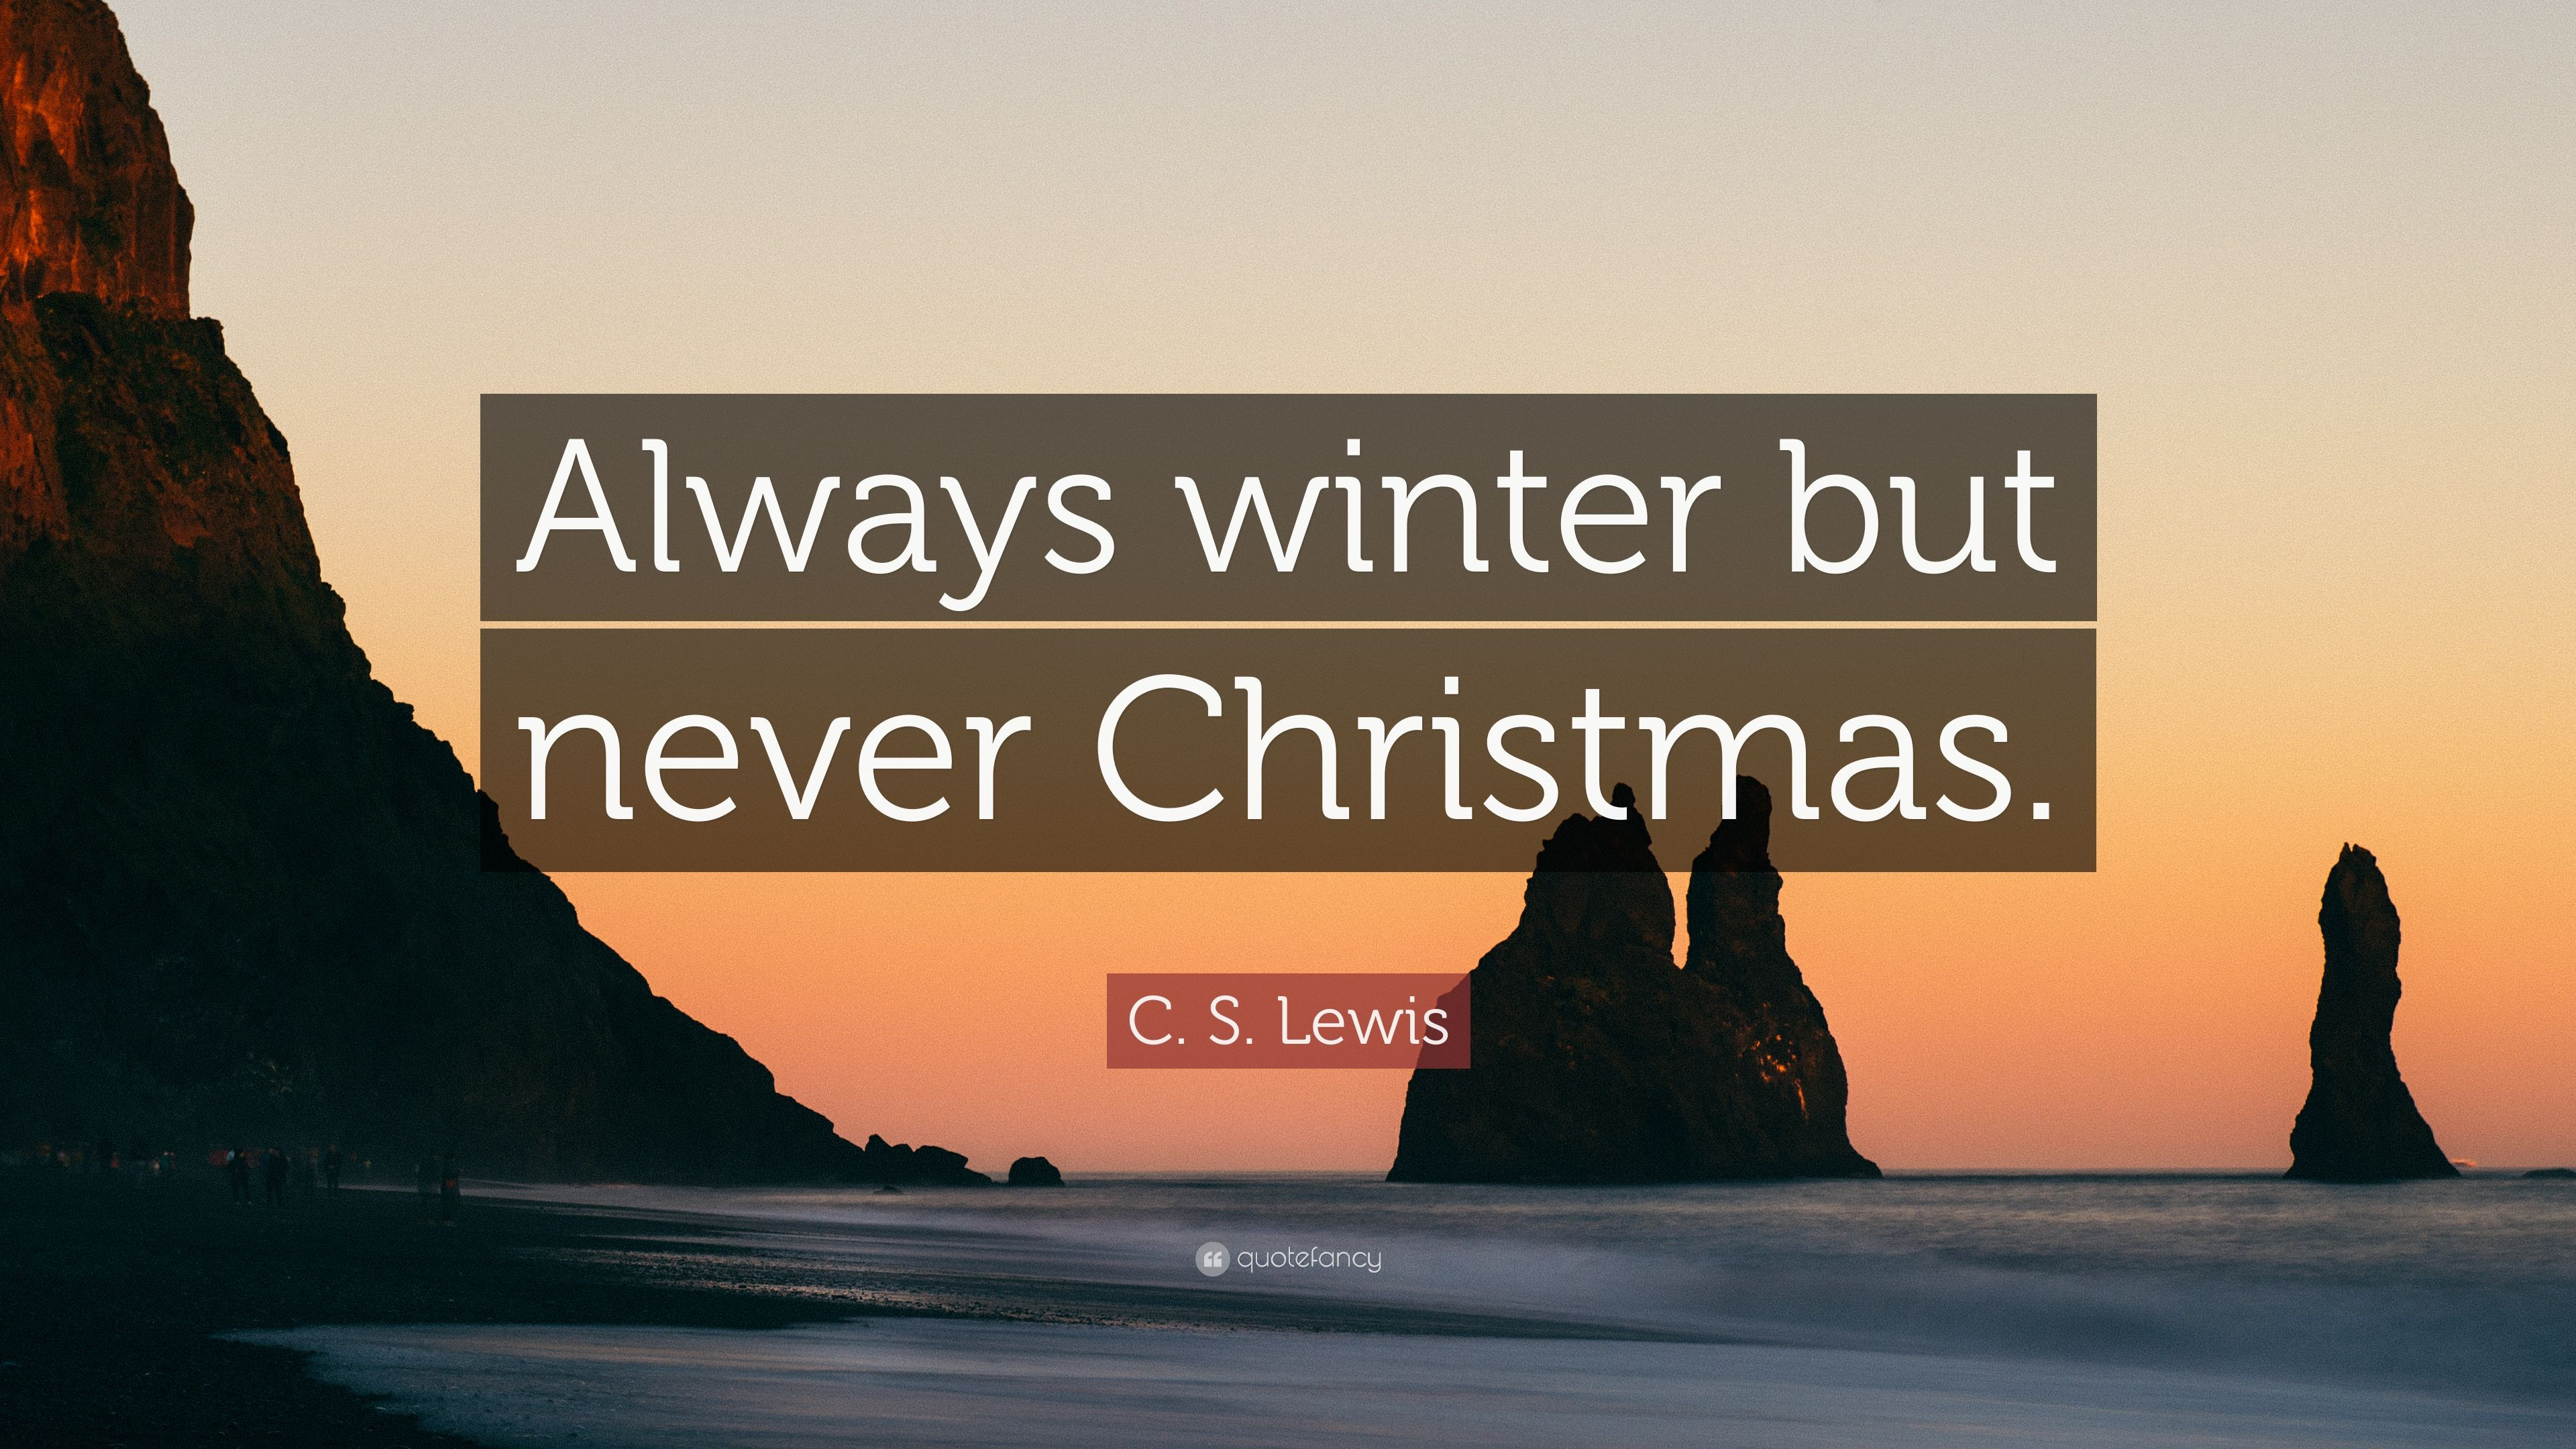 C.S.Lewis Christmas Quotes
 C S Lewis Quote “Always winter but never Christmas